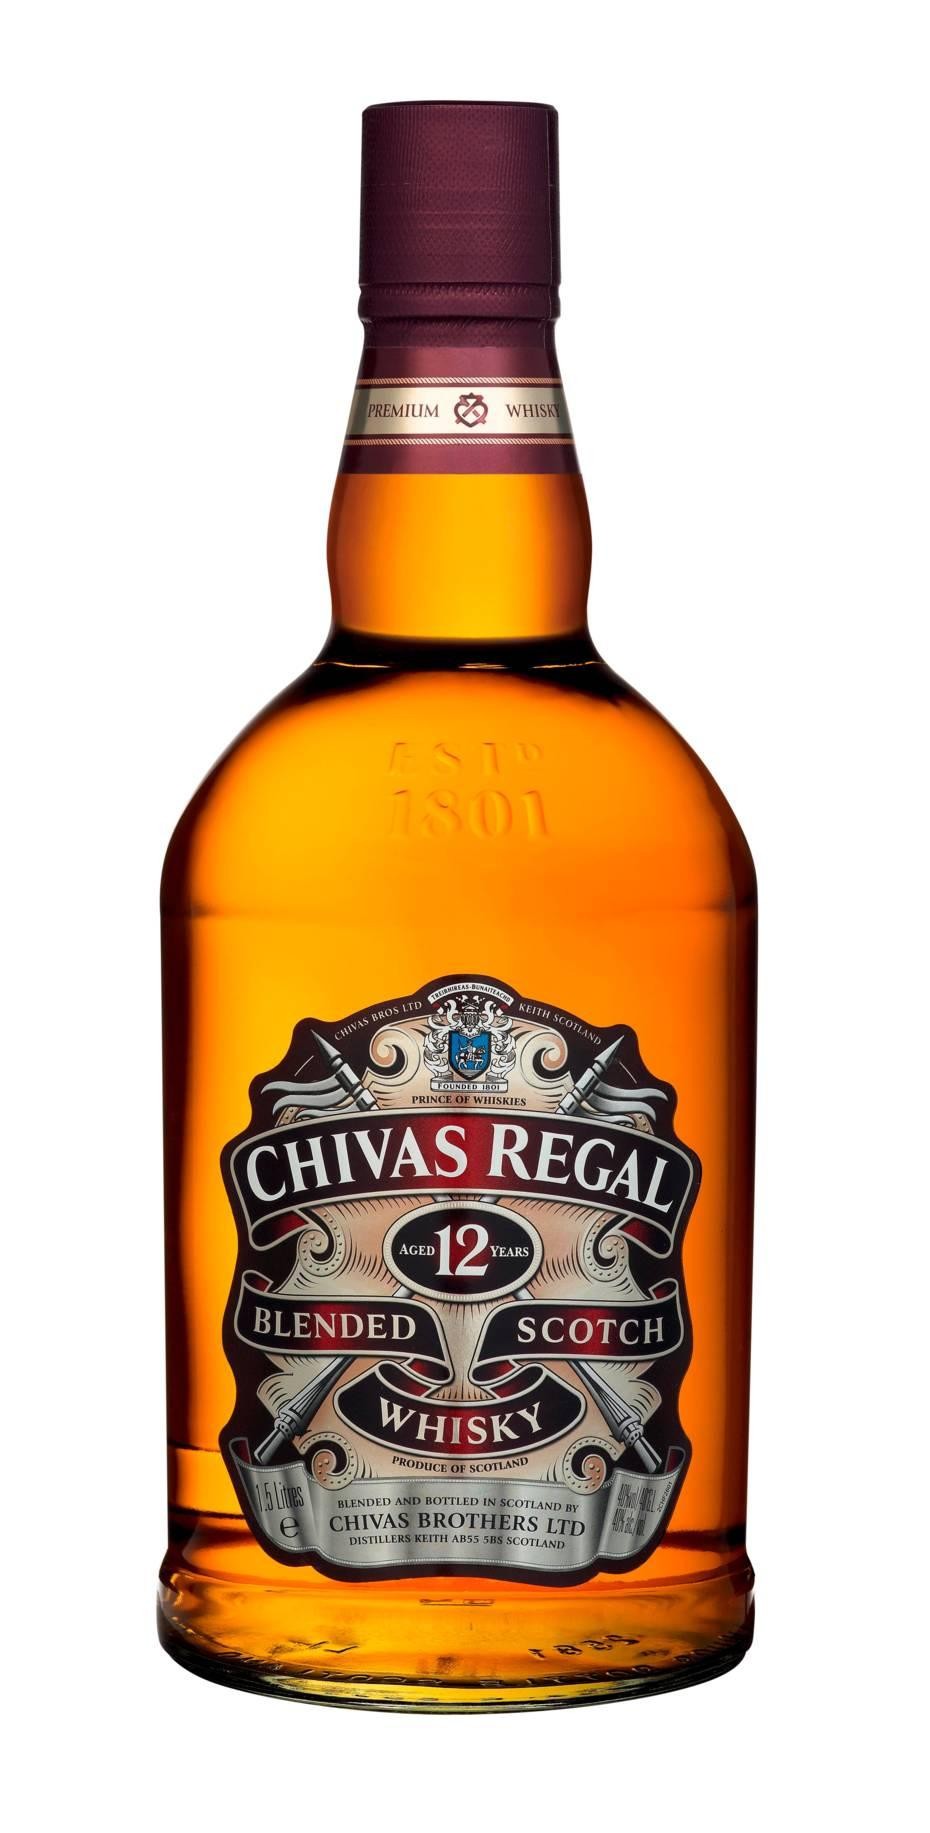 Chivas Regal Blended Scotch Whisky 12 Year Old 1.75L